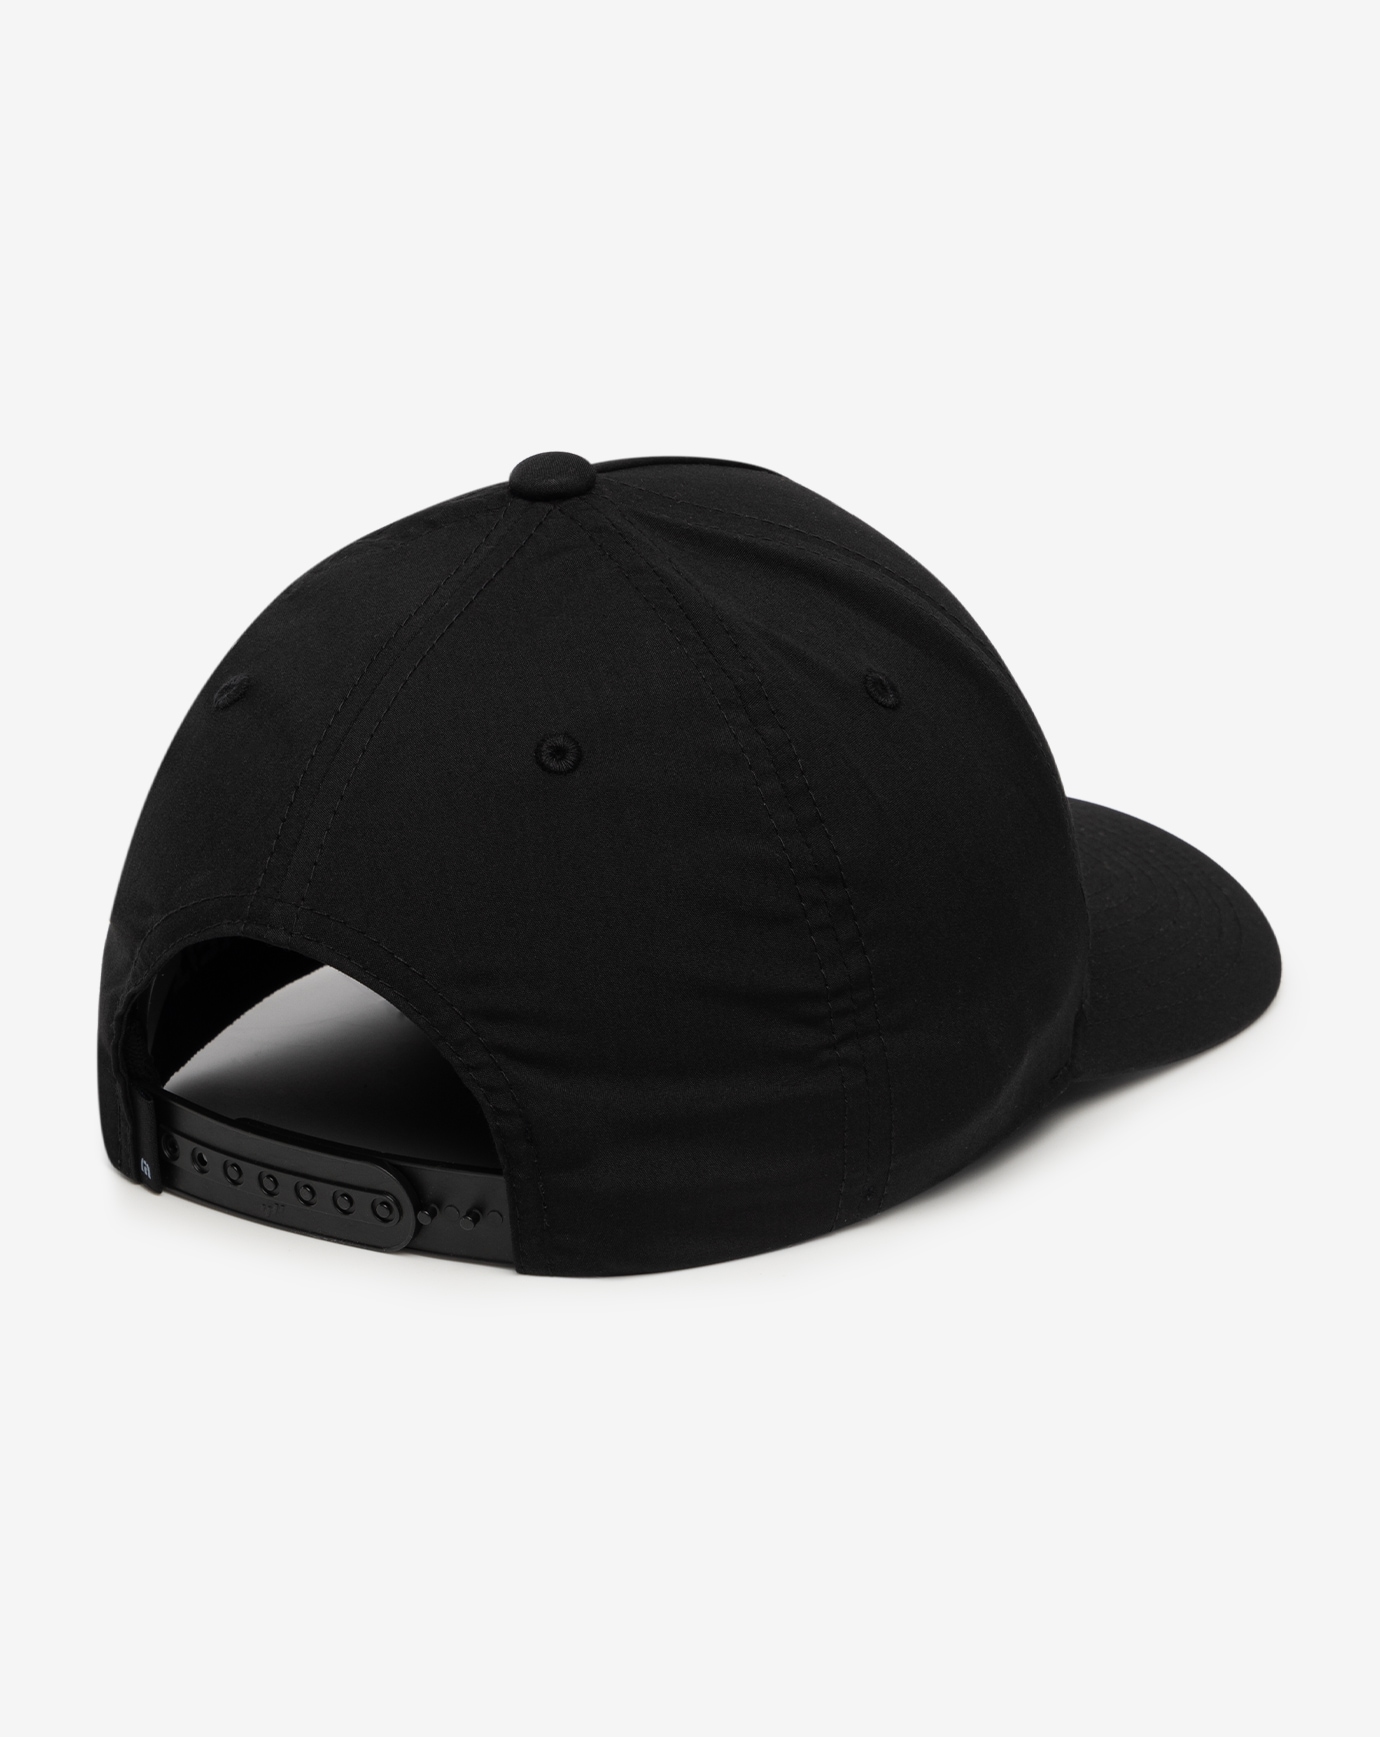 NIGHT ON THE TOWN SNAPBACK HAT Image Thumbnail 2